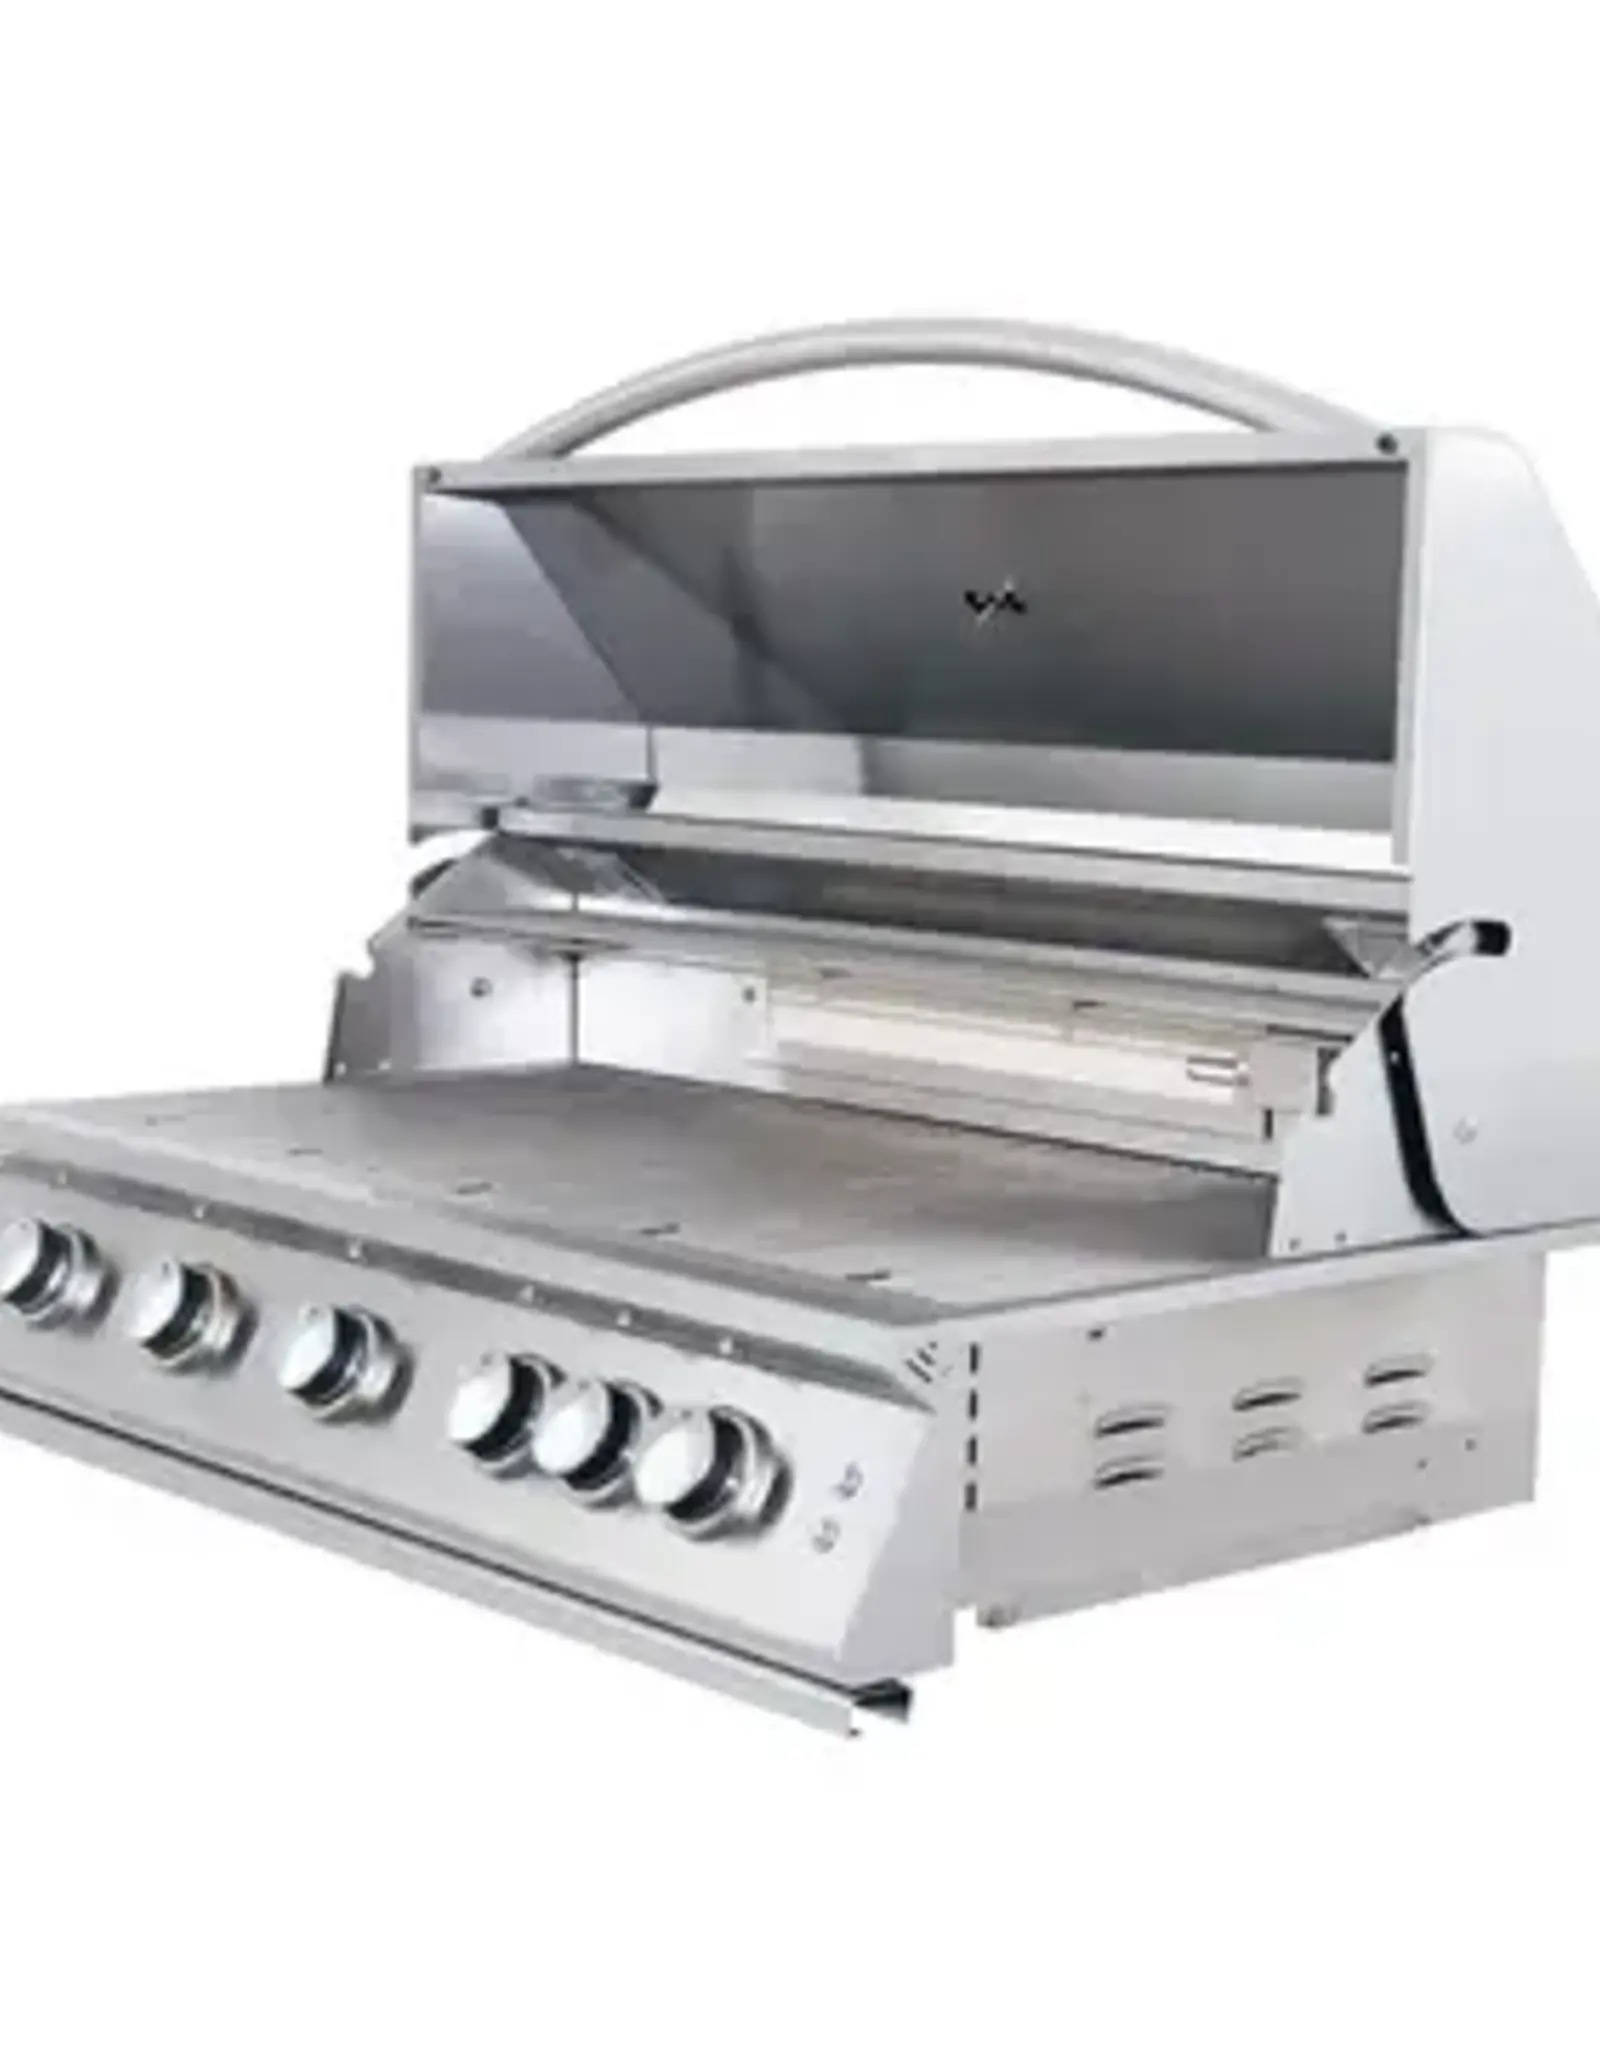 Renaissance Cooking Systems Renaissance Cooking Systems 40" Premier Drop-In Grill W / Rear Burner & LED Lights - Natural Gas  - RJC40AL